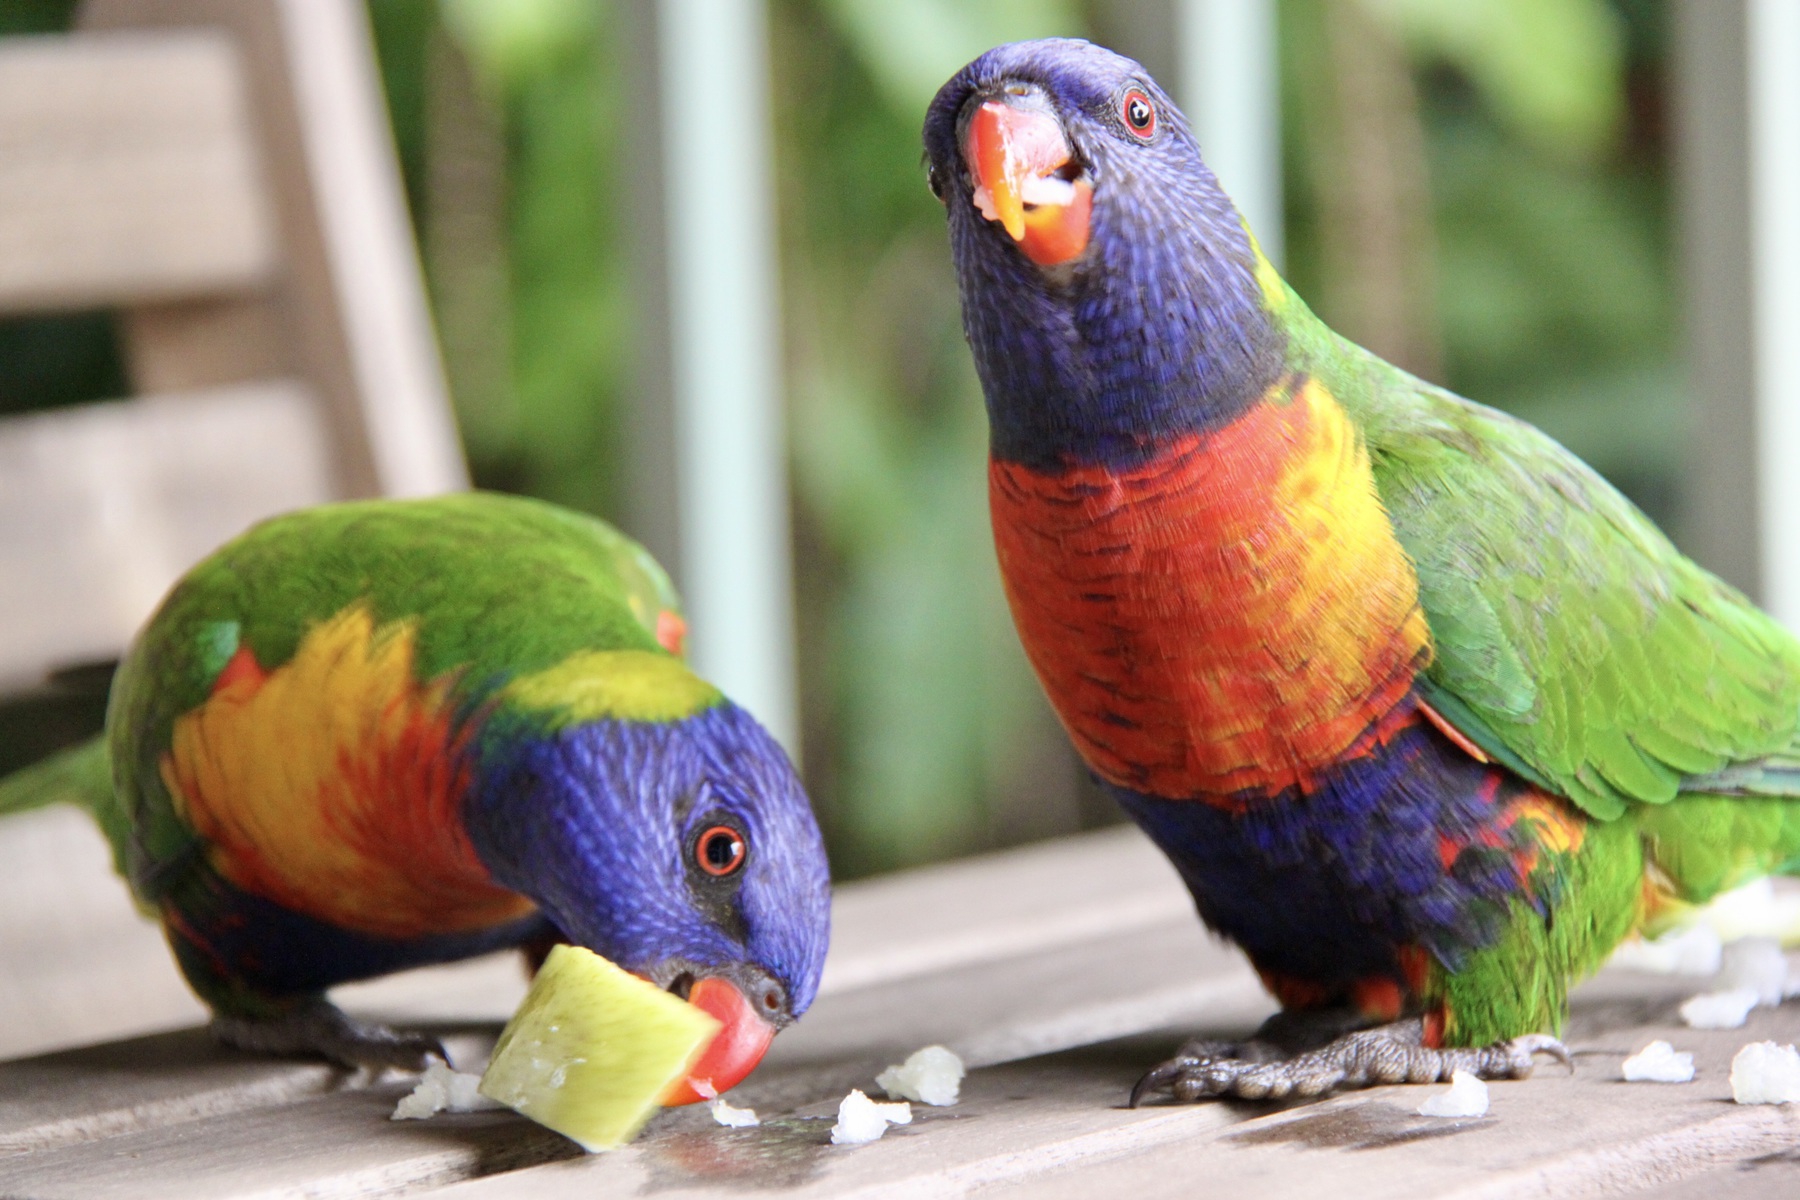 Two rainbow lorikeets eating pear on an outdoor setting with a railing and macadamia tree in the background